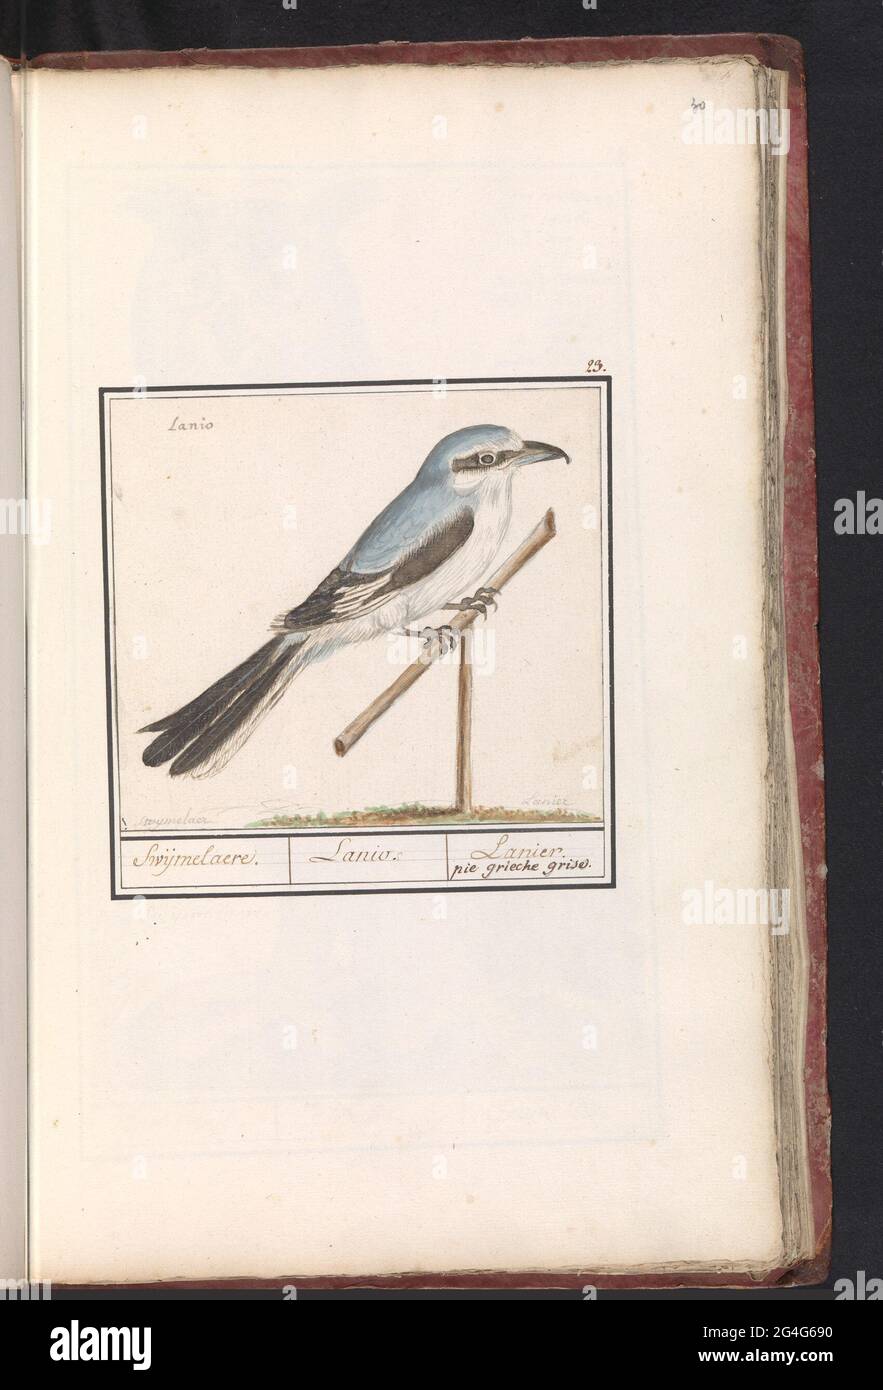 Klapekster (Lanius Excubitor); Selfelere. / Lanio. / Lanier. Pie Grieche Grise. Klapekster. Numbered at the top right: 23. With the name in Latin. Part of the first album with drawings of birds. Third of twelve albums with drawings of animals, birds and plants known around 1600, commissioned by Emperor Rudolf II. With explanation in Dutch, Latin and French. Stock Photo